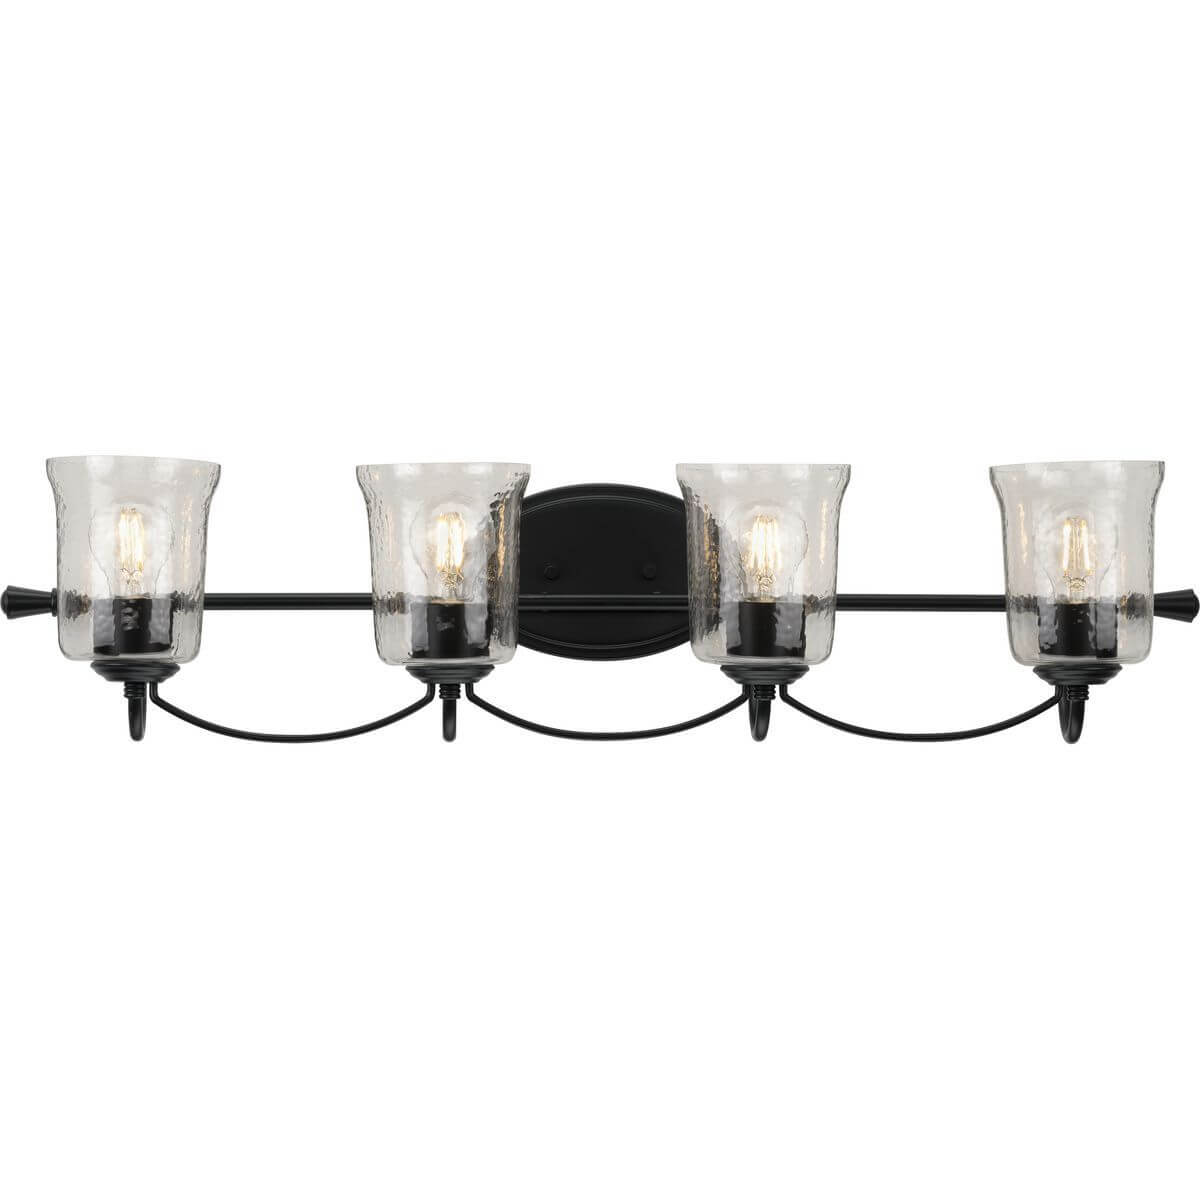 Progress Lighting Bowman 4 Light 34 inch Bath Vanity Light in Matte Black with Clear Chiseled Glass Shade P300256-031